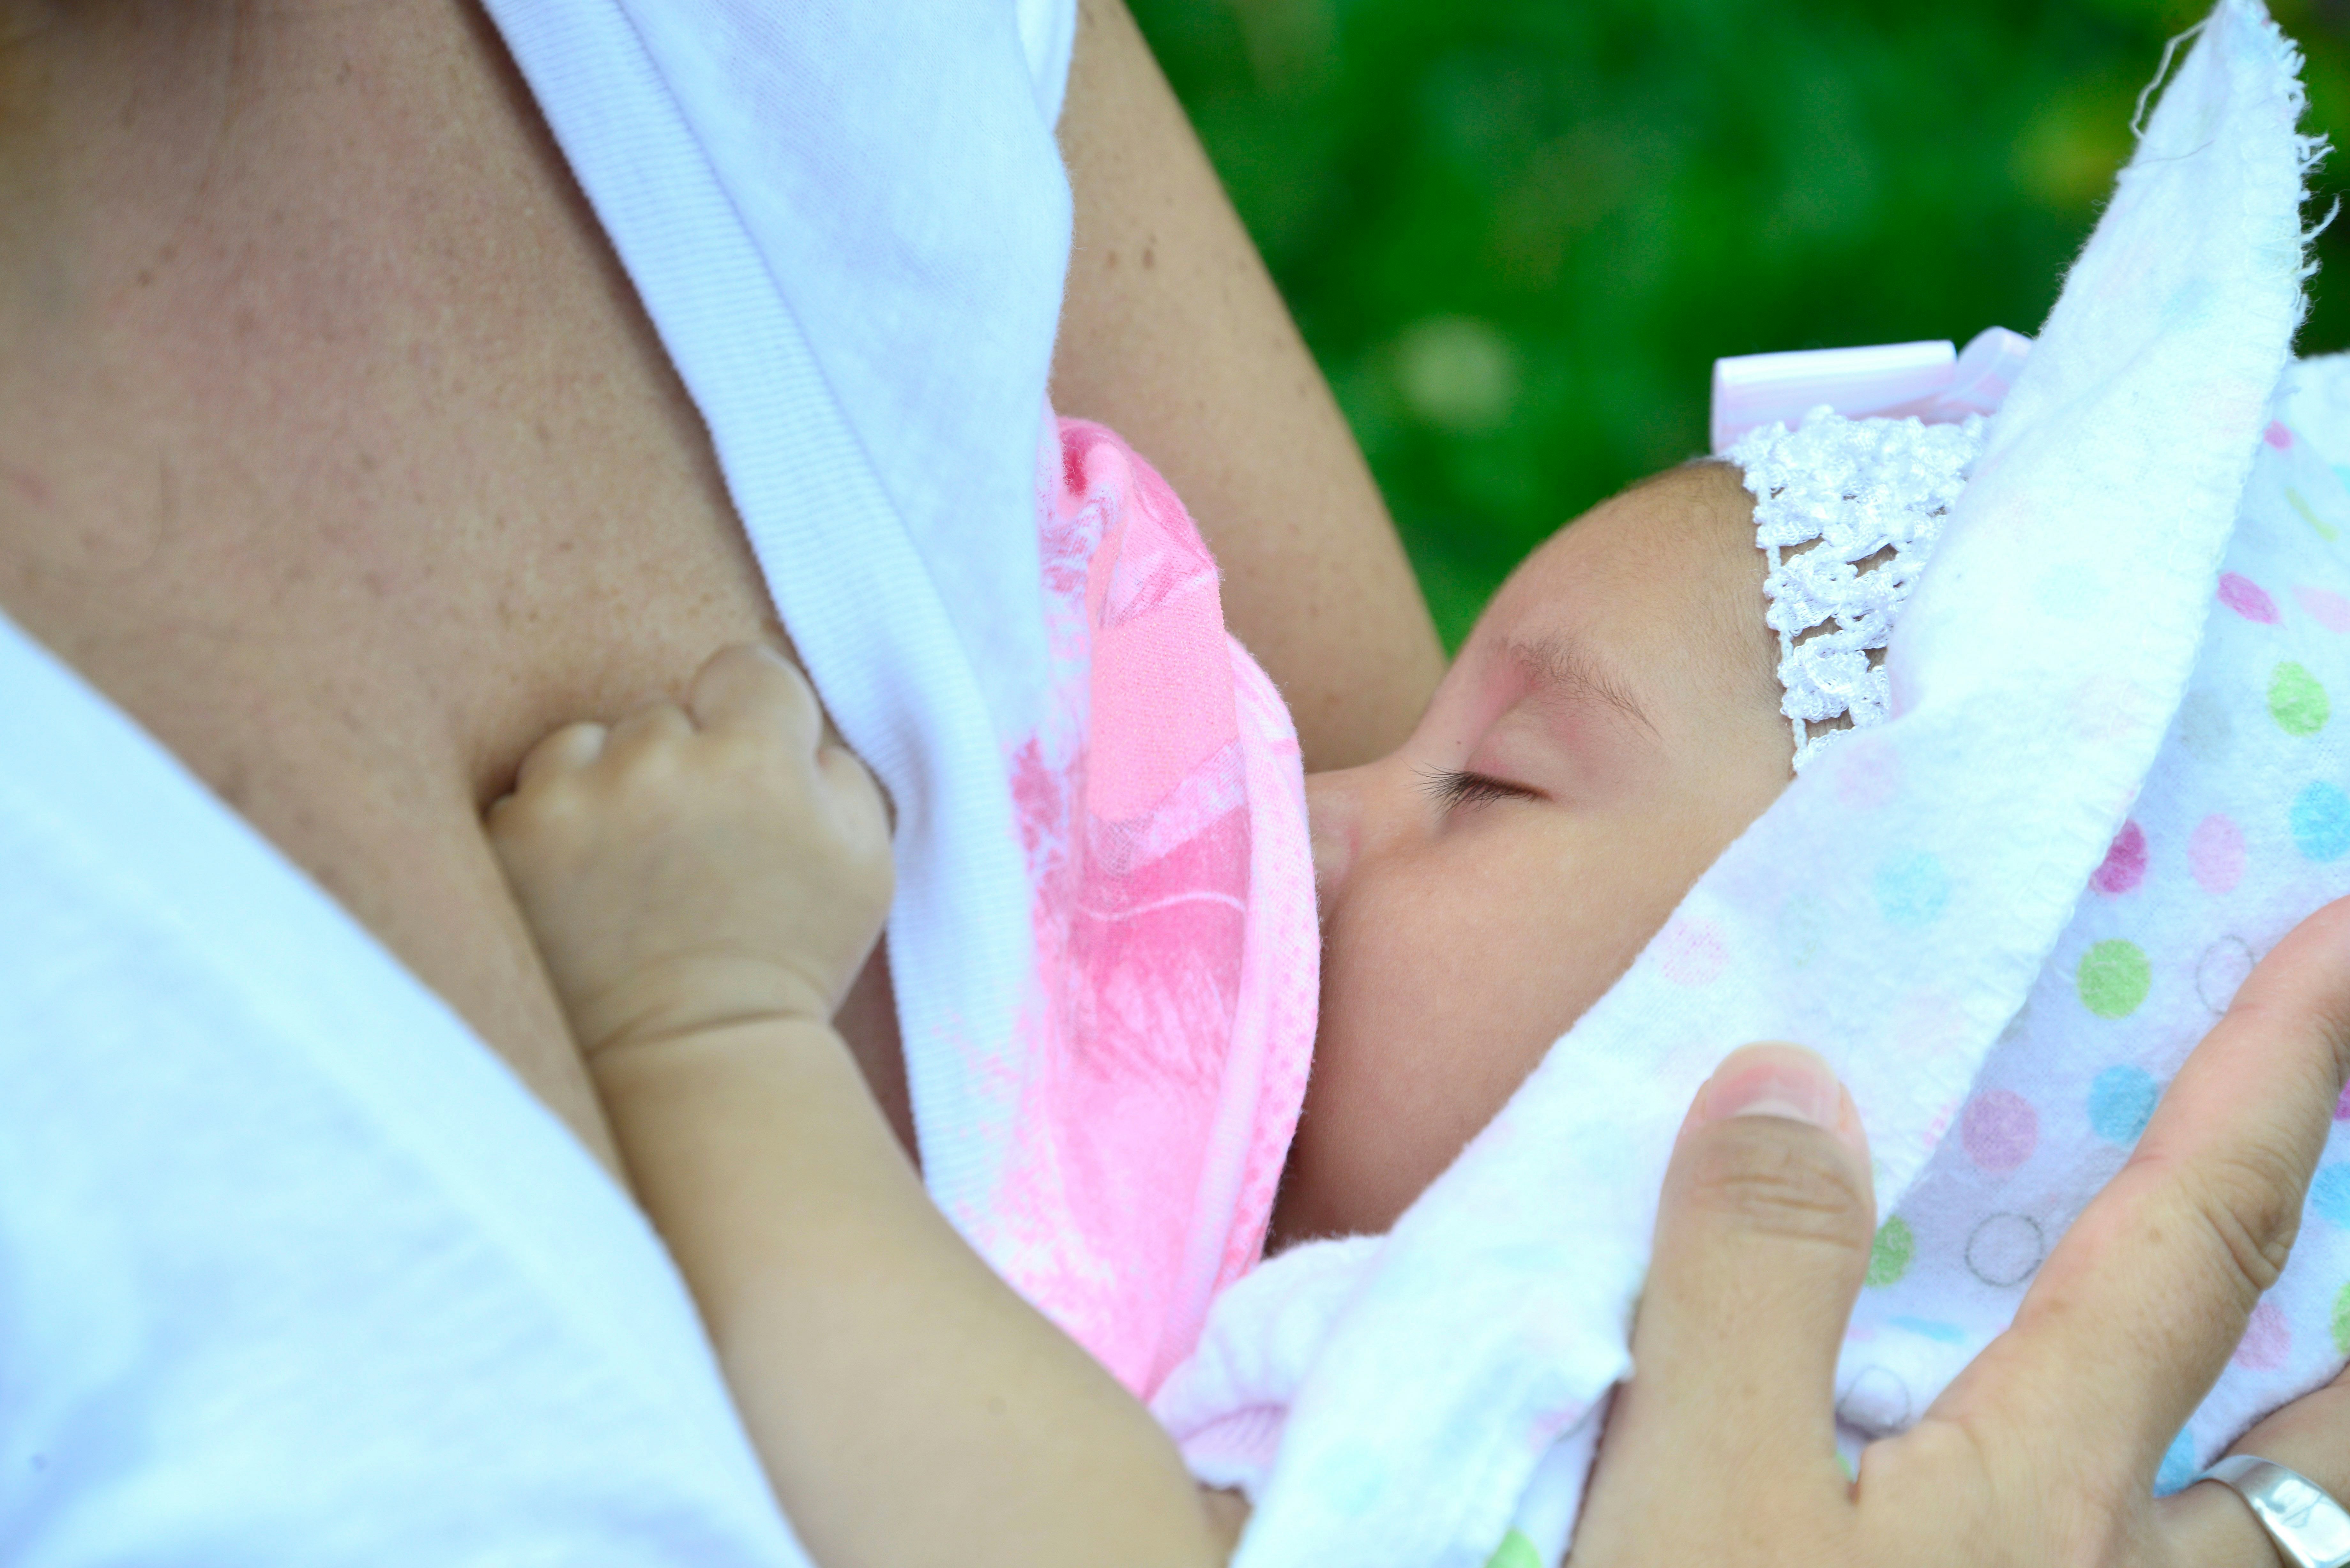 Breastfed Babies Need More Vitamin D According To A New Study